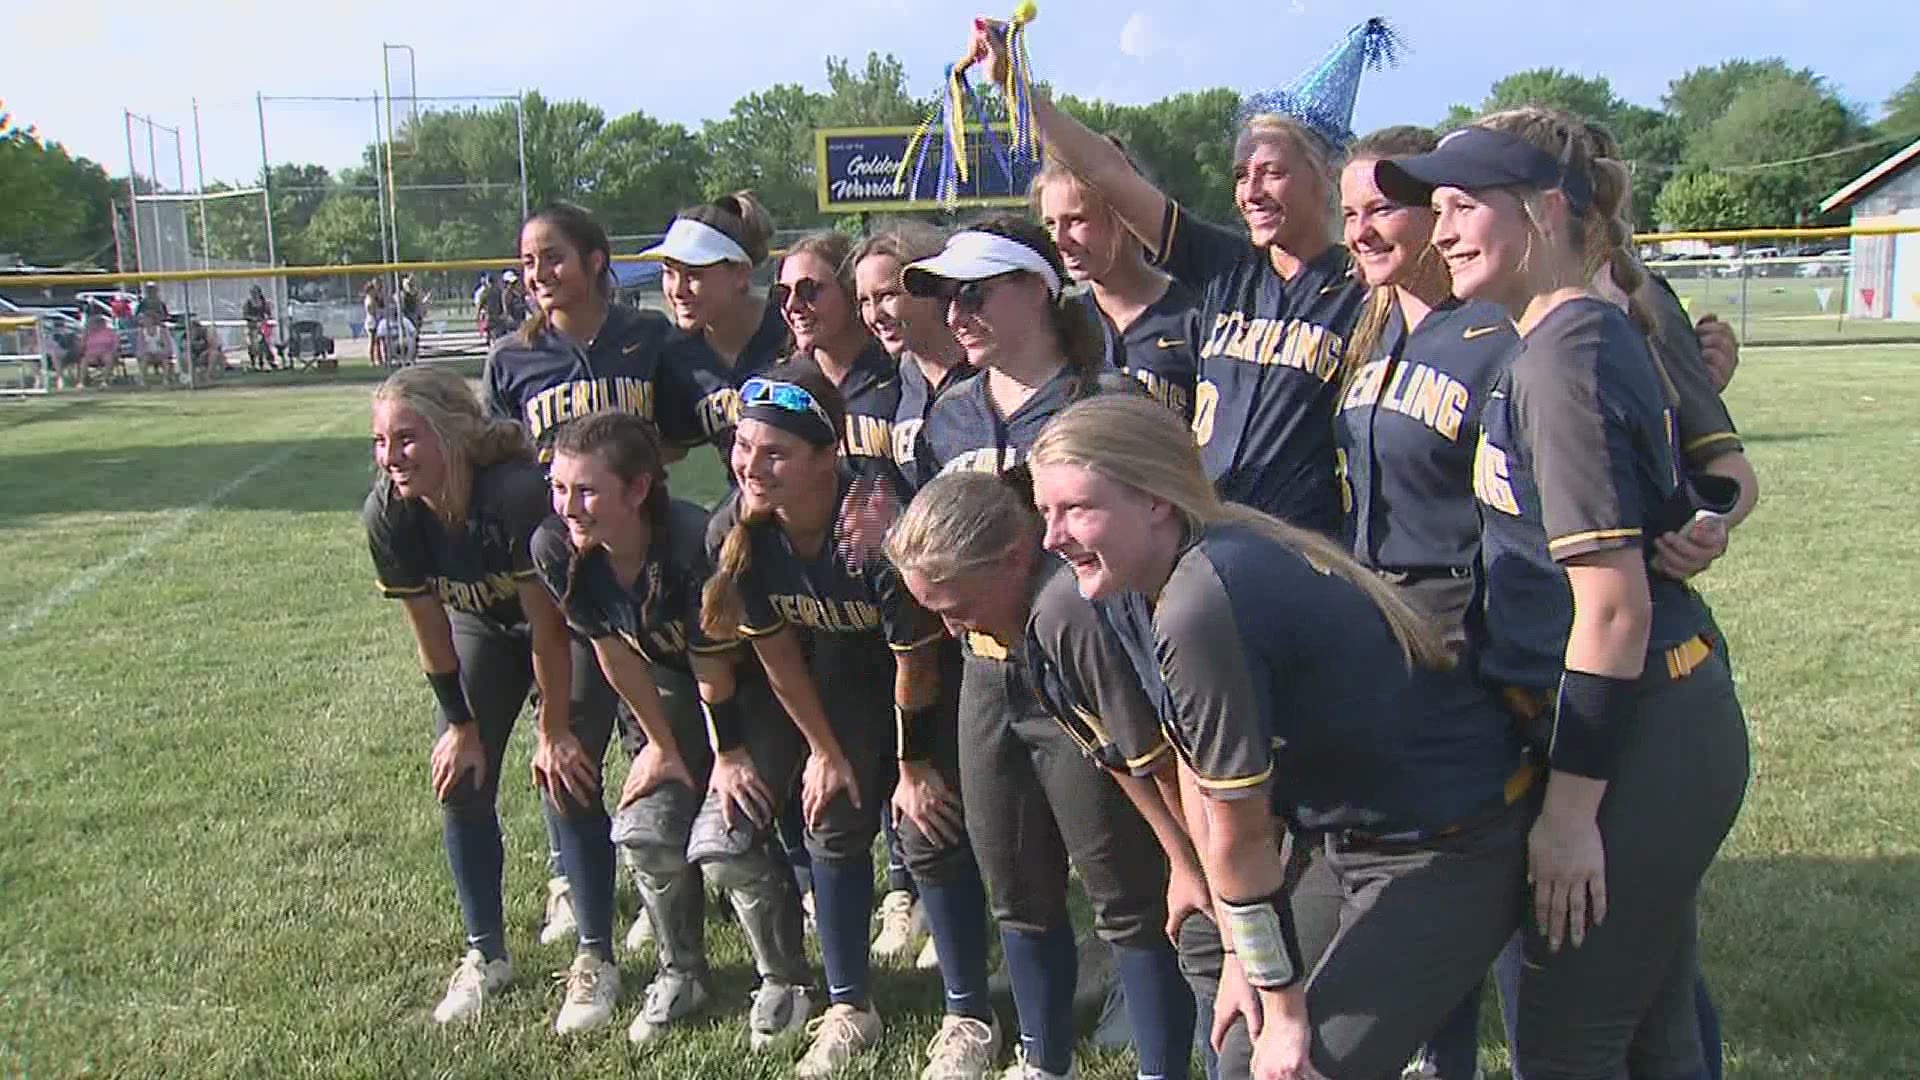 Sterling post a shut out win beating Kaneland 5-0 to win their 5th Sectional Title.